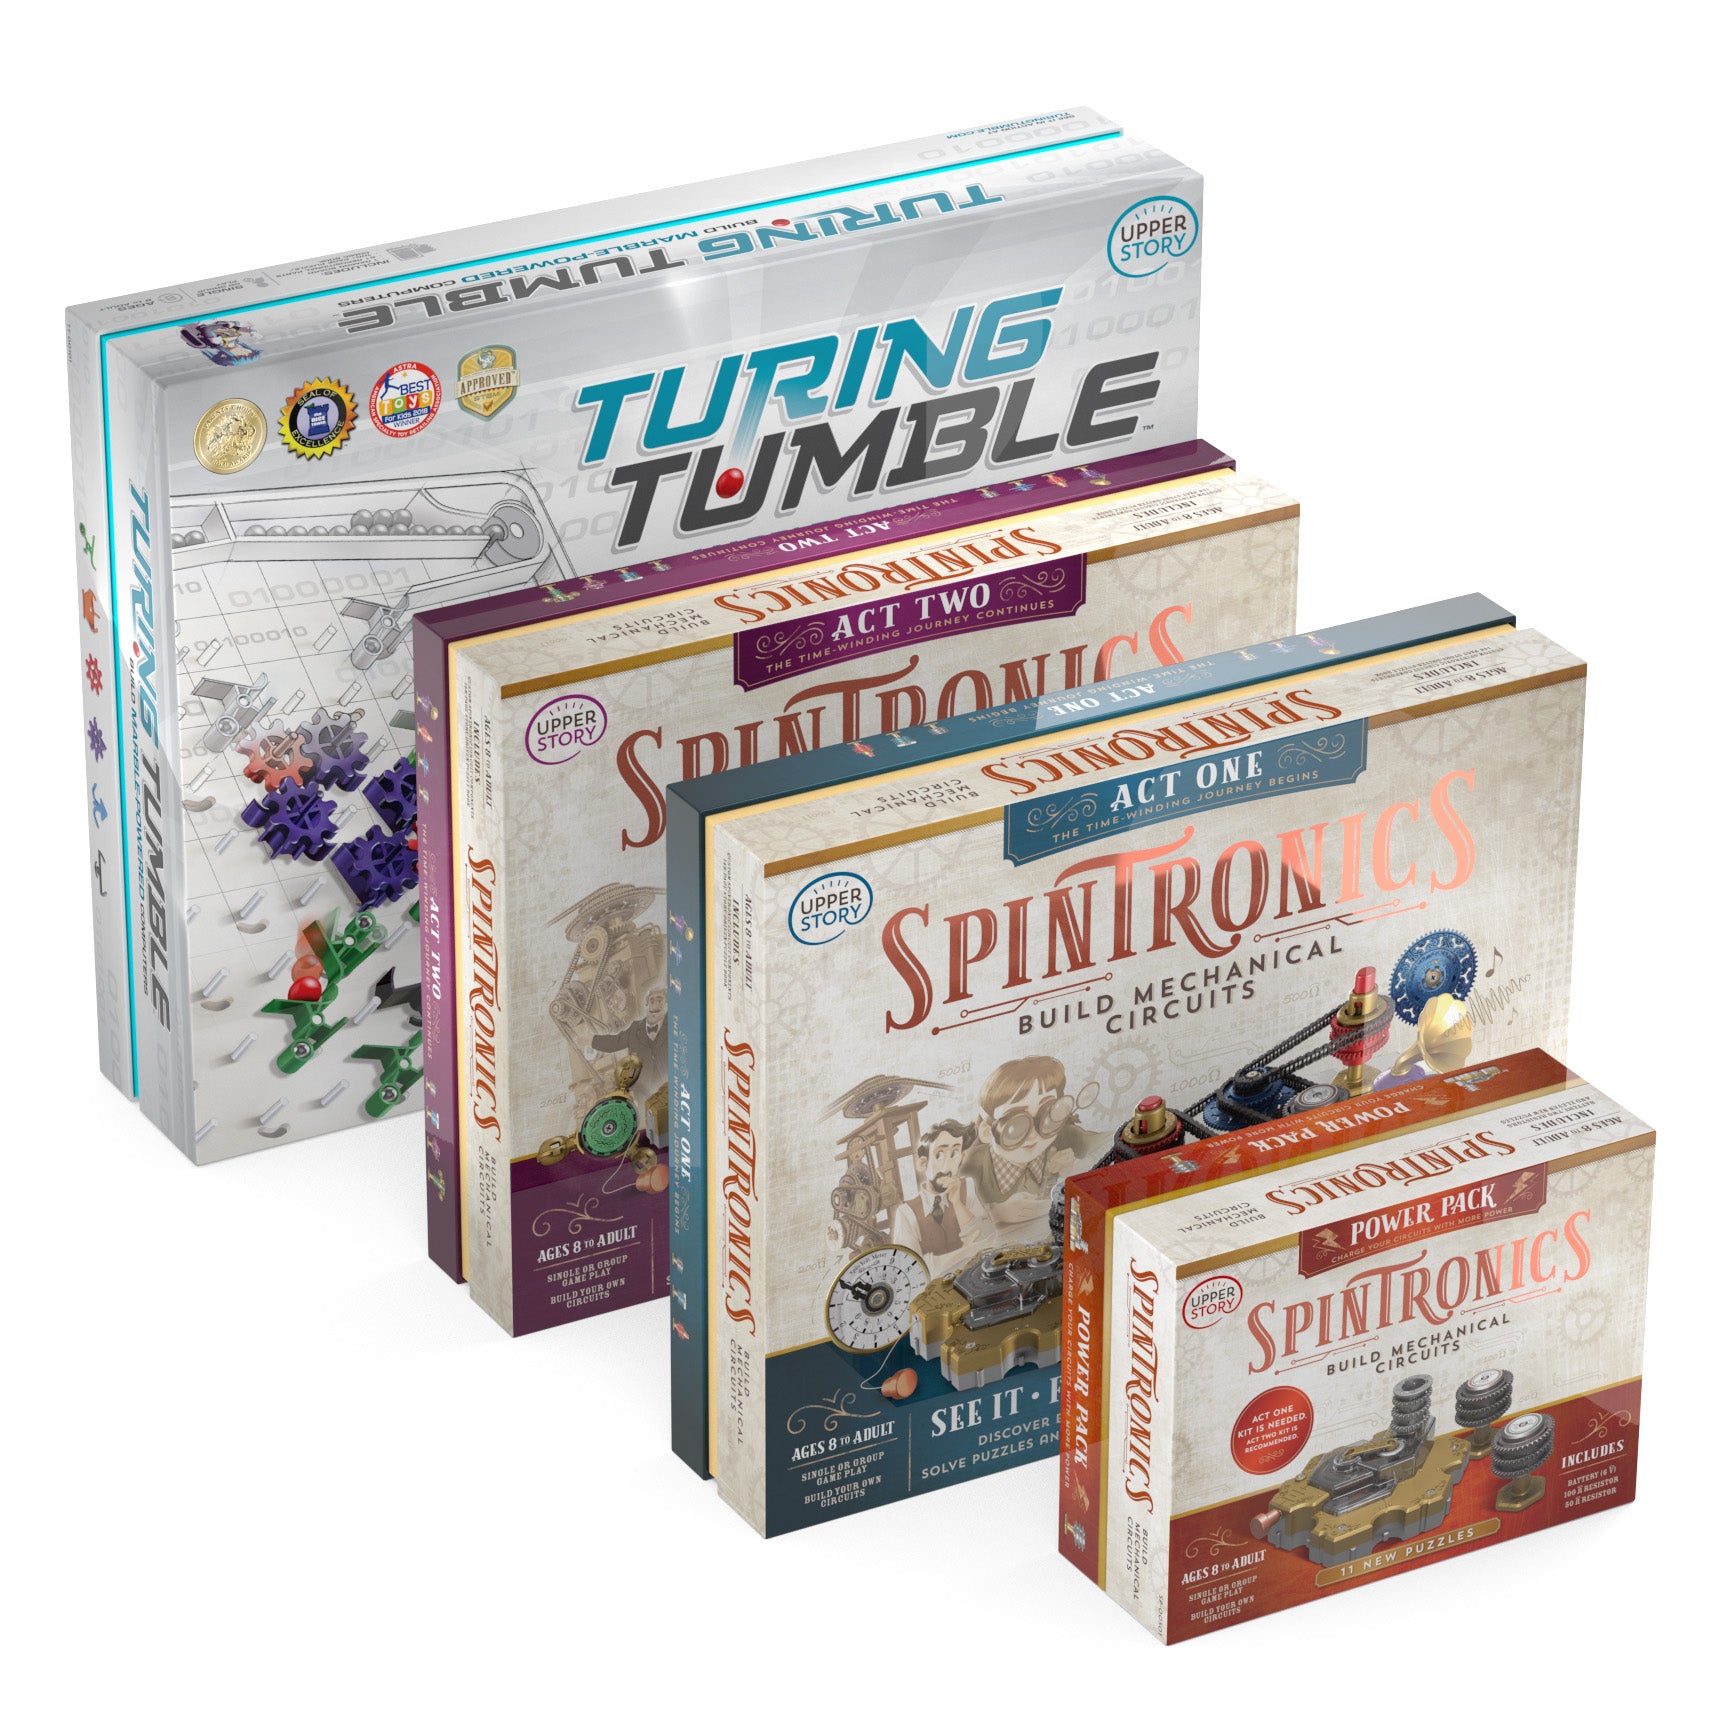 Turing Tumble Review – The Boardgame Detective